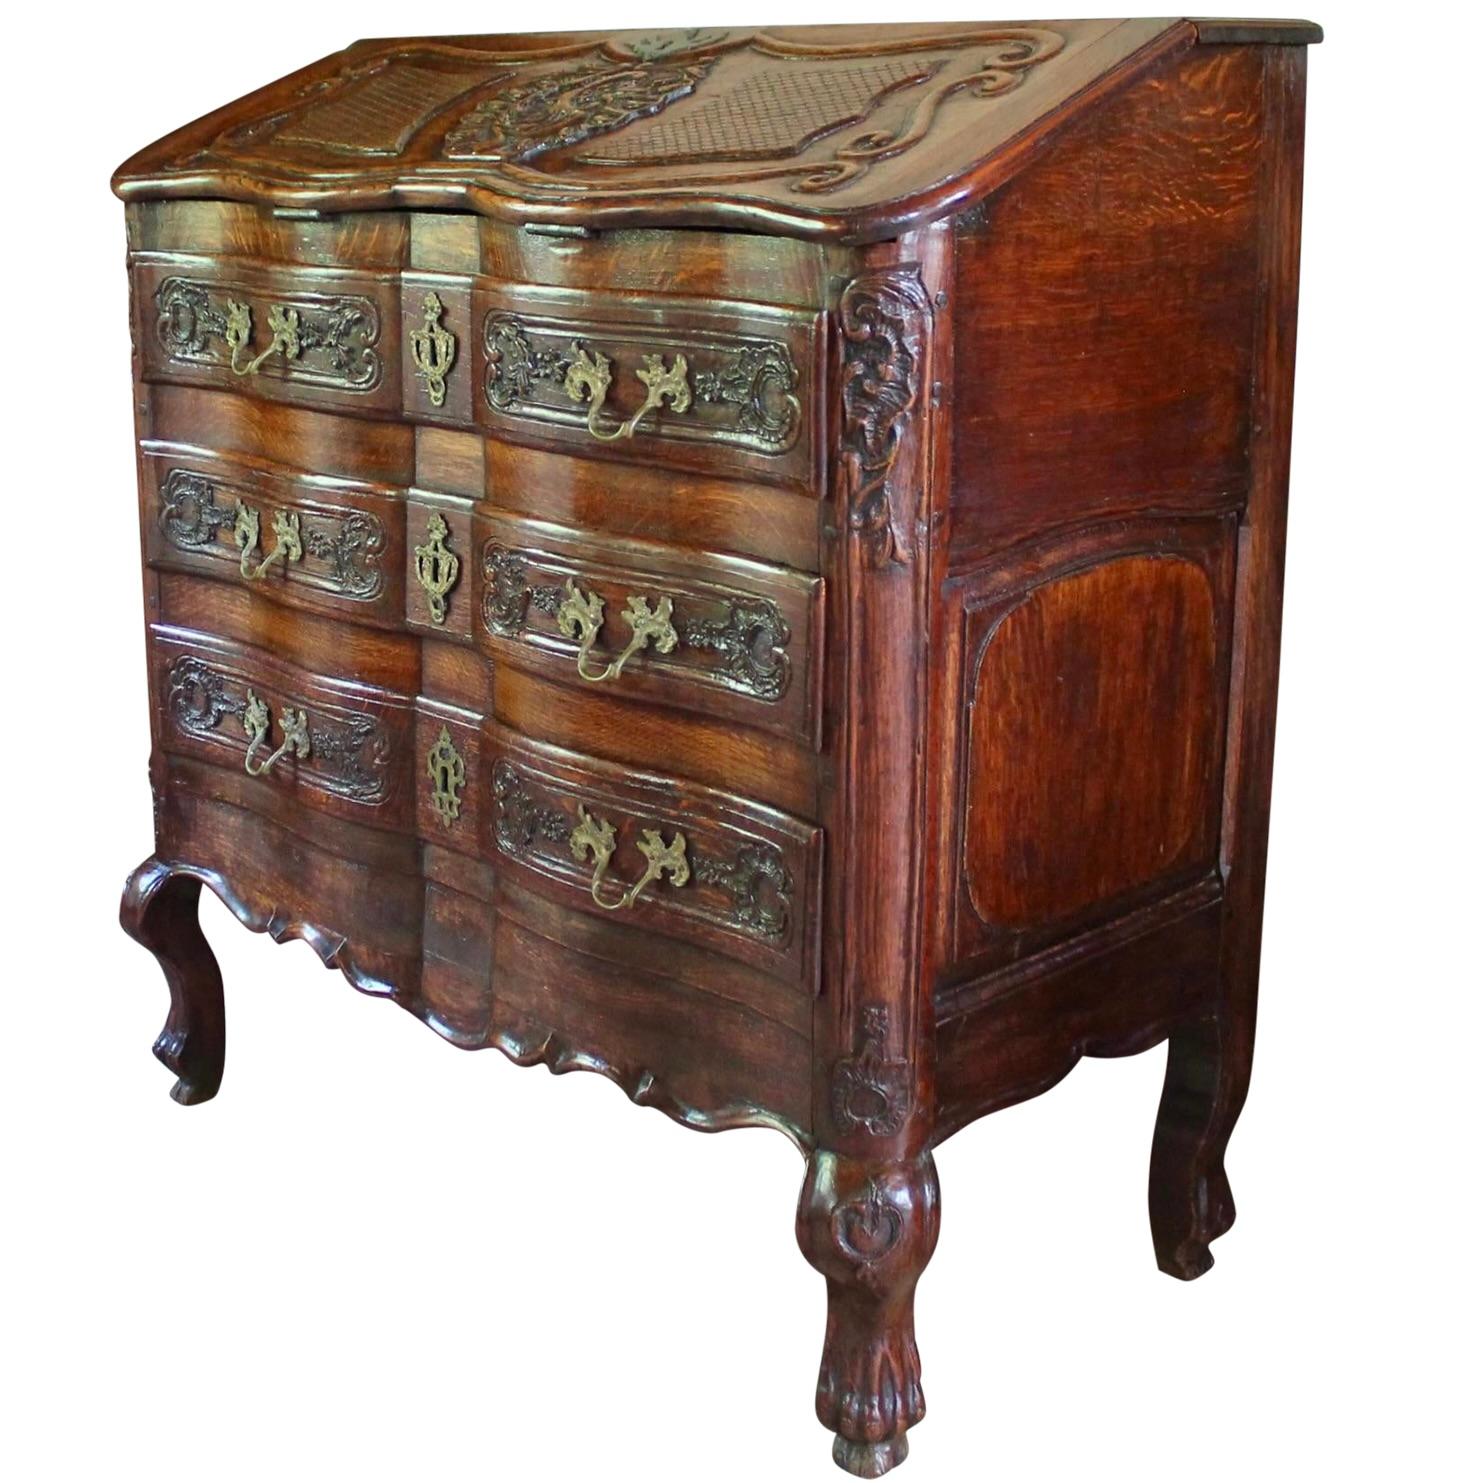 Rococo Revival Continental Régence Inspired Commode With Rococo Carved Desk Top For Sale